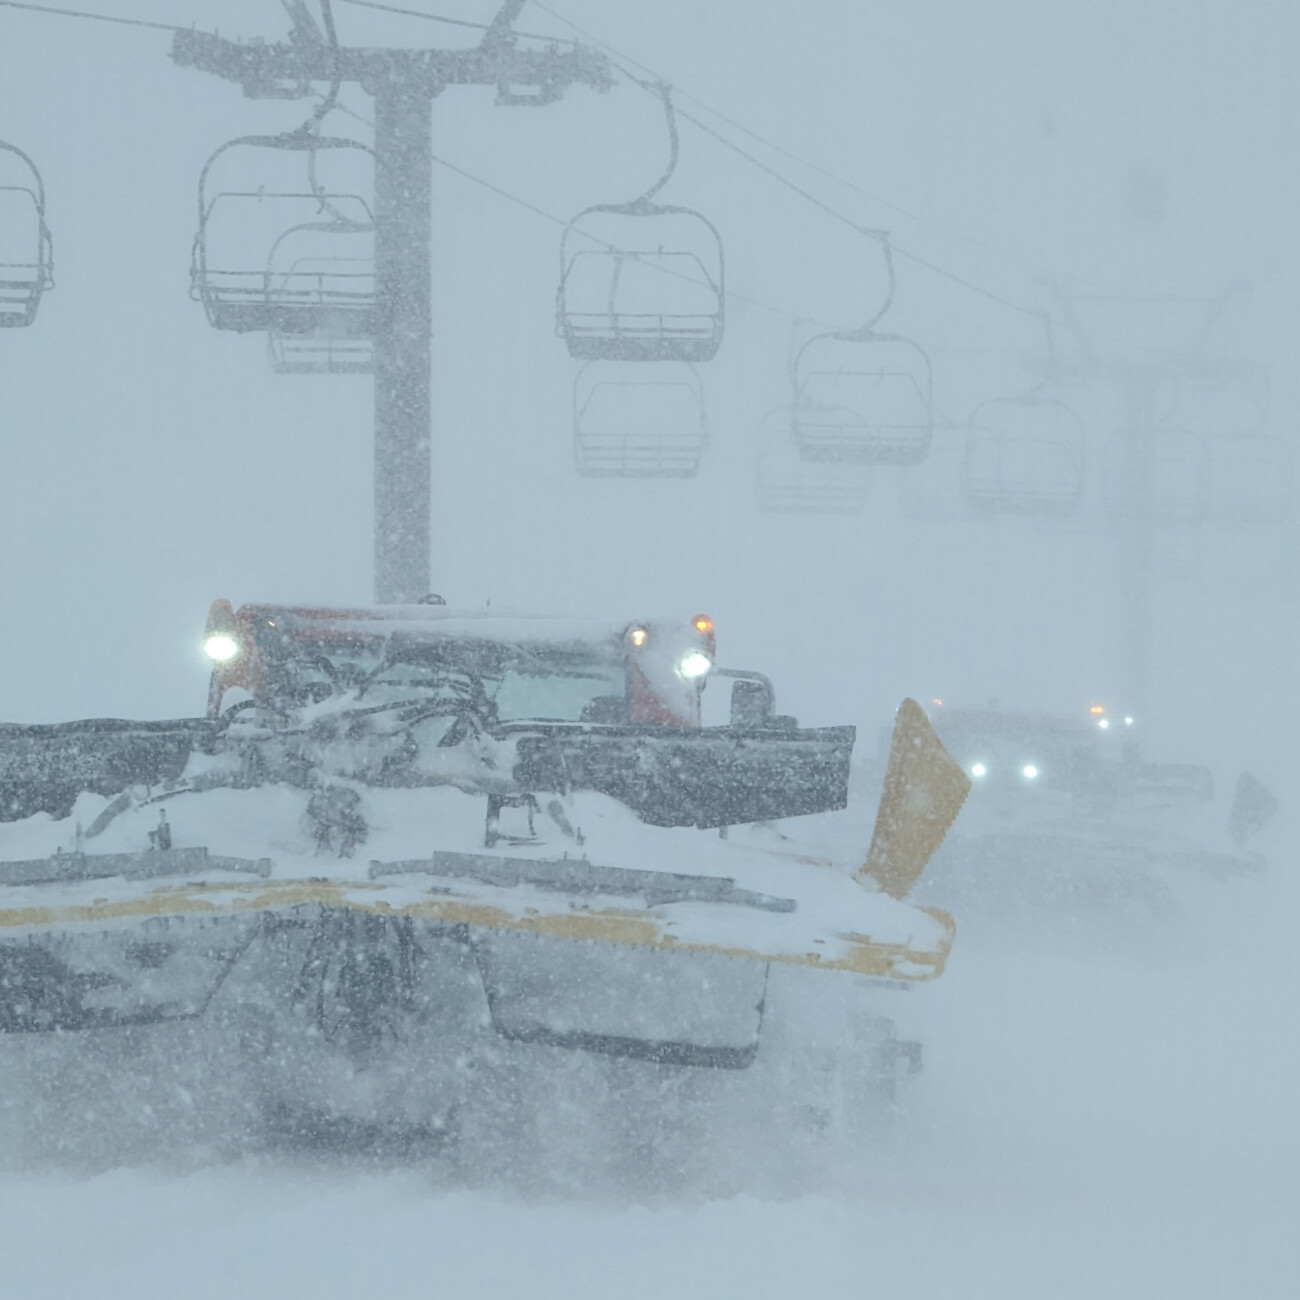 Snowcats crossing under a chairlift in heavy snowfall.